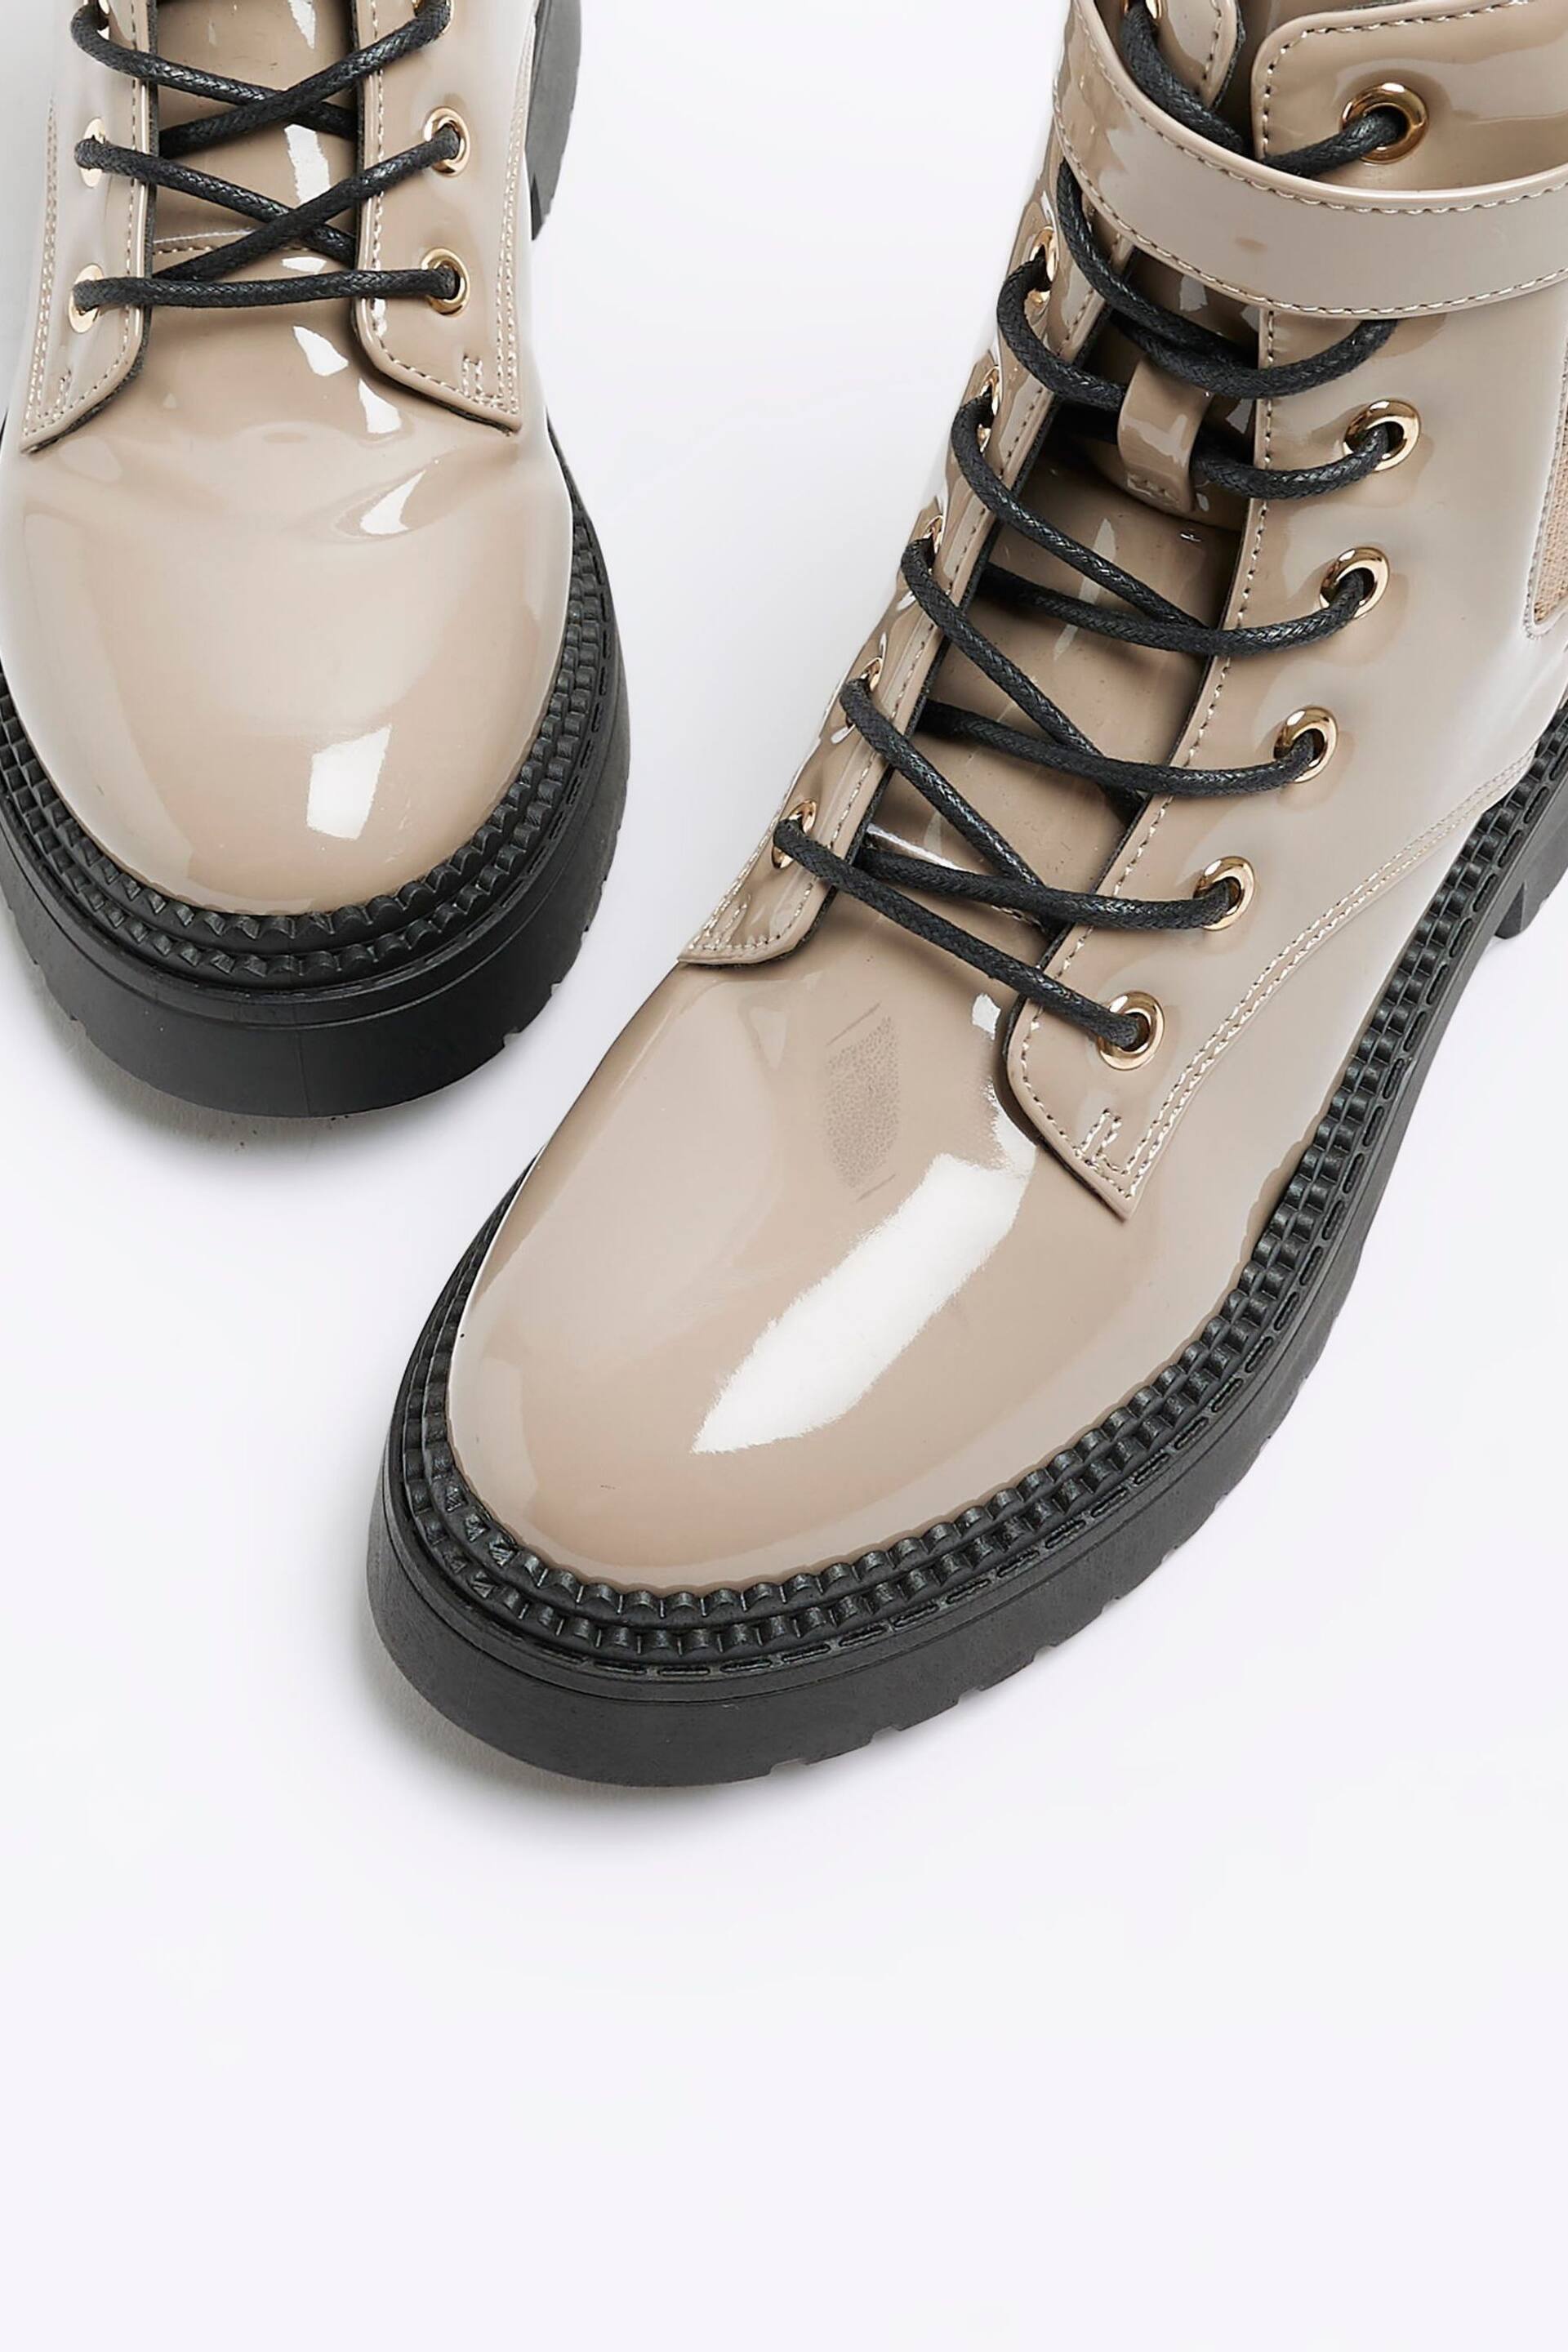 River Island Brown Lace Up Buckle Boots - Image 5 of 6